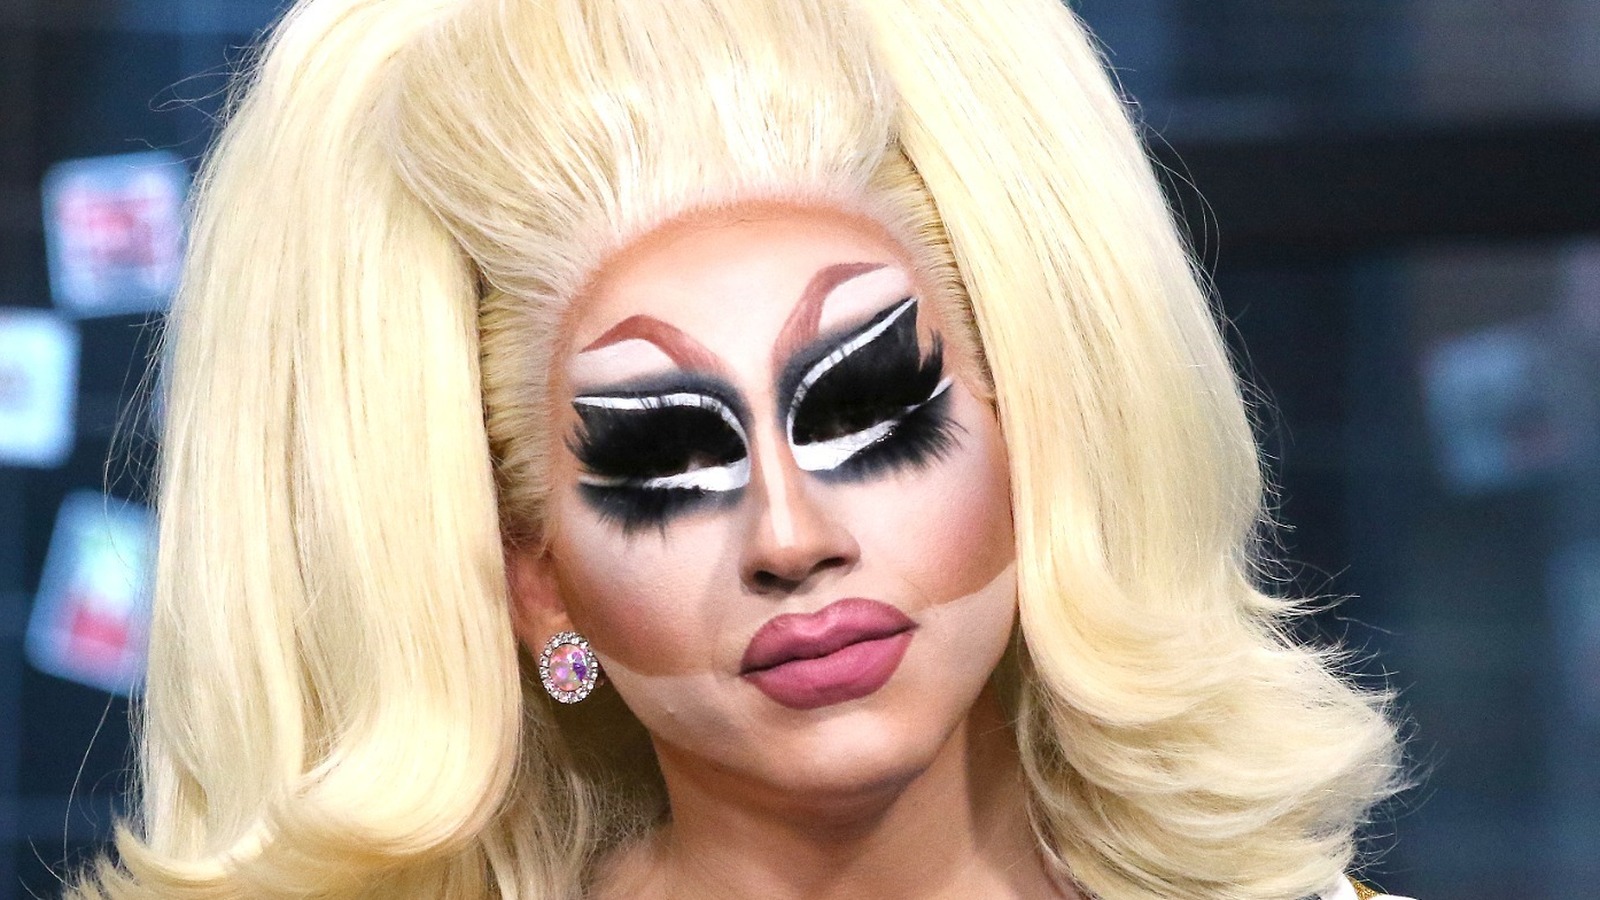 Rupaul S Drag Race Star Trixie Mattel Opens Up About Her Role In